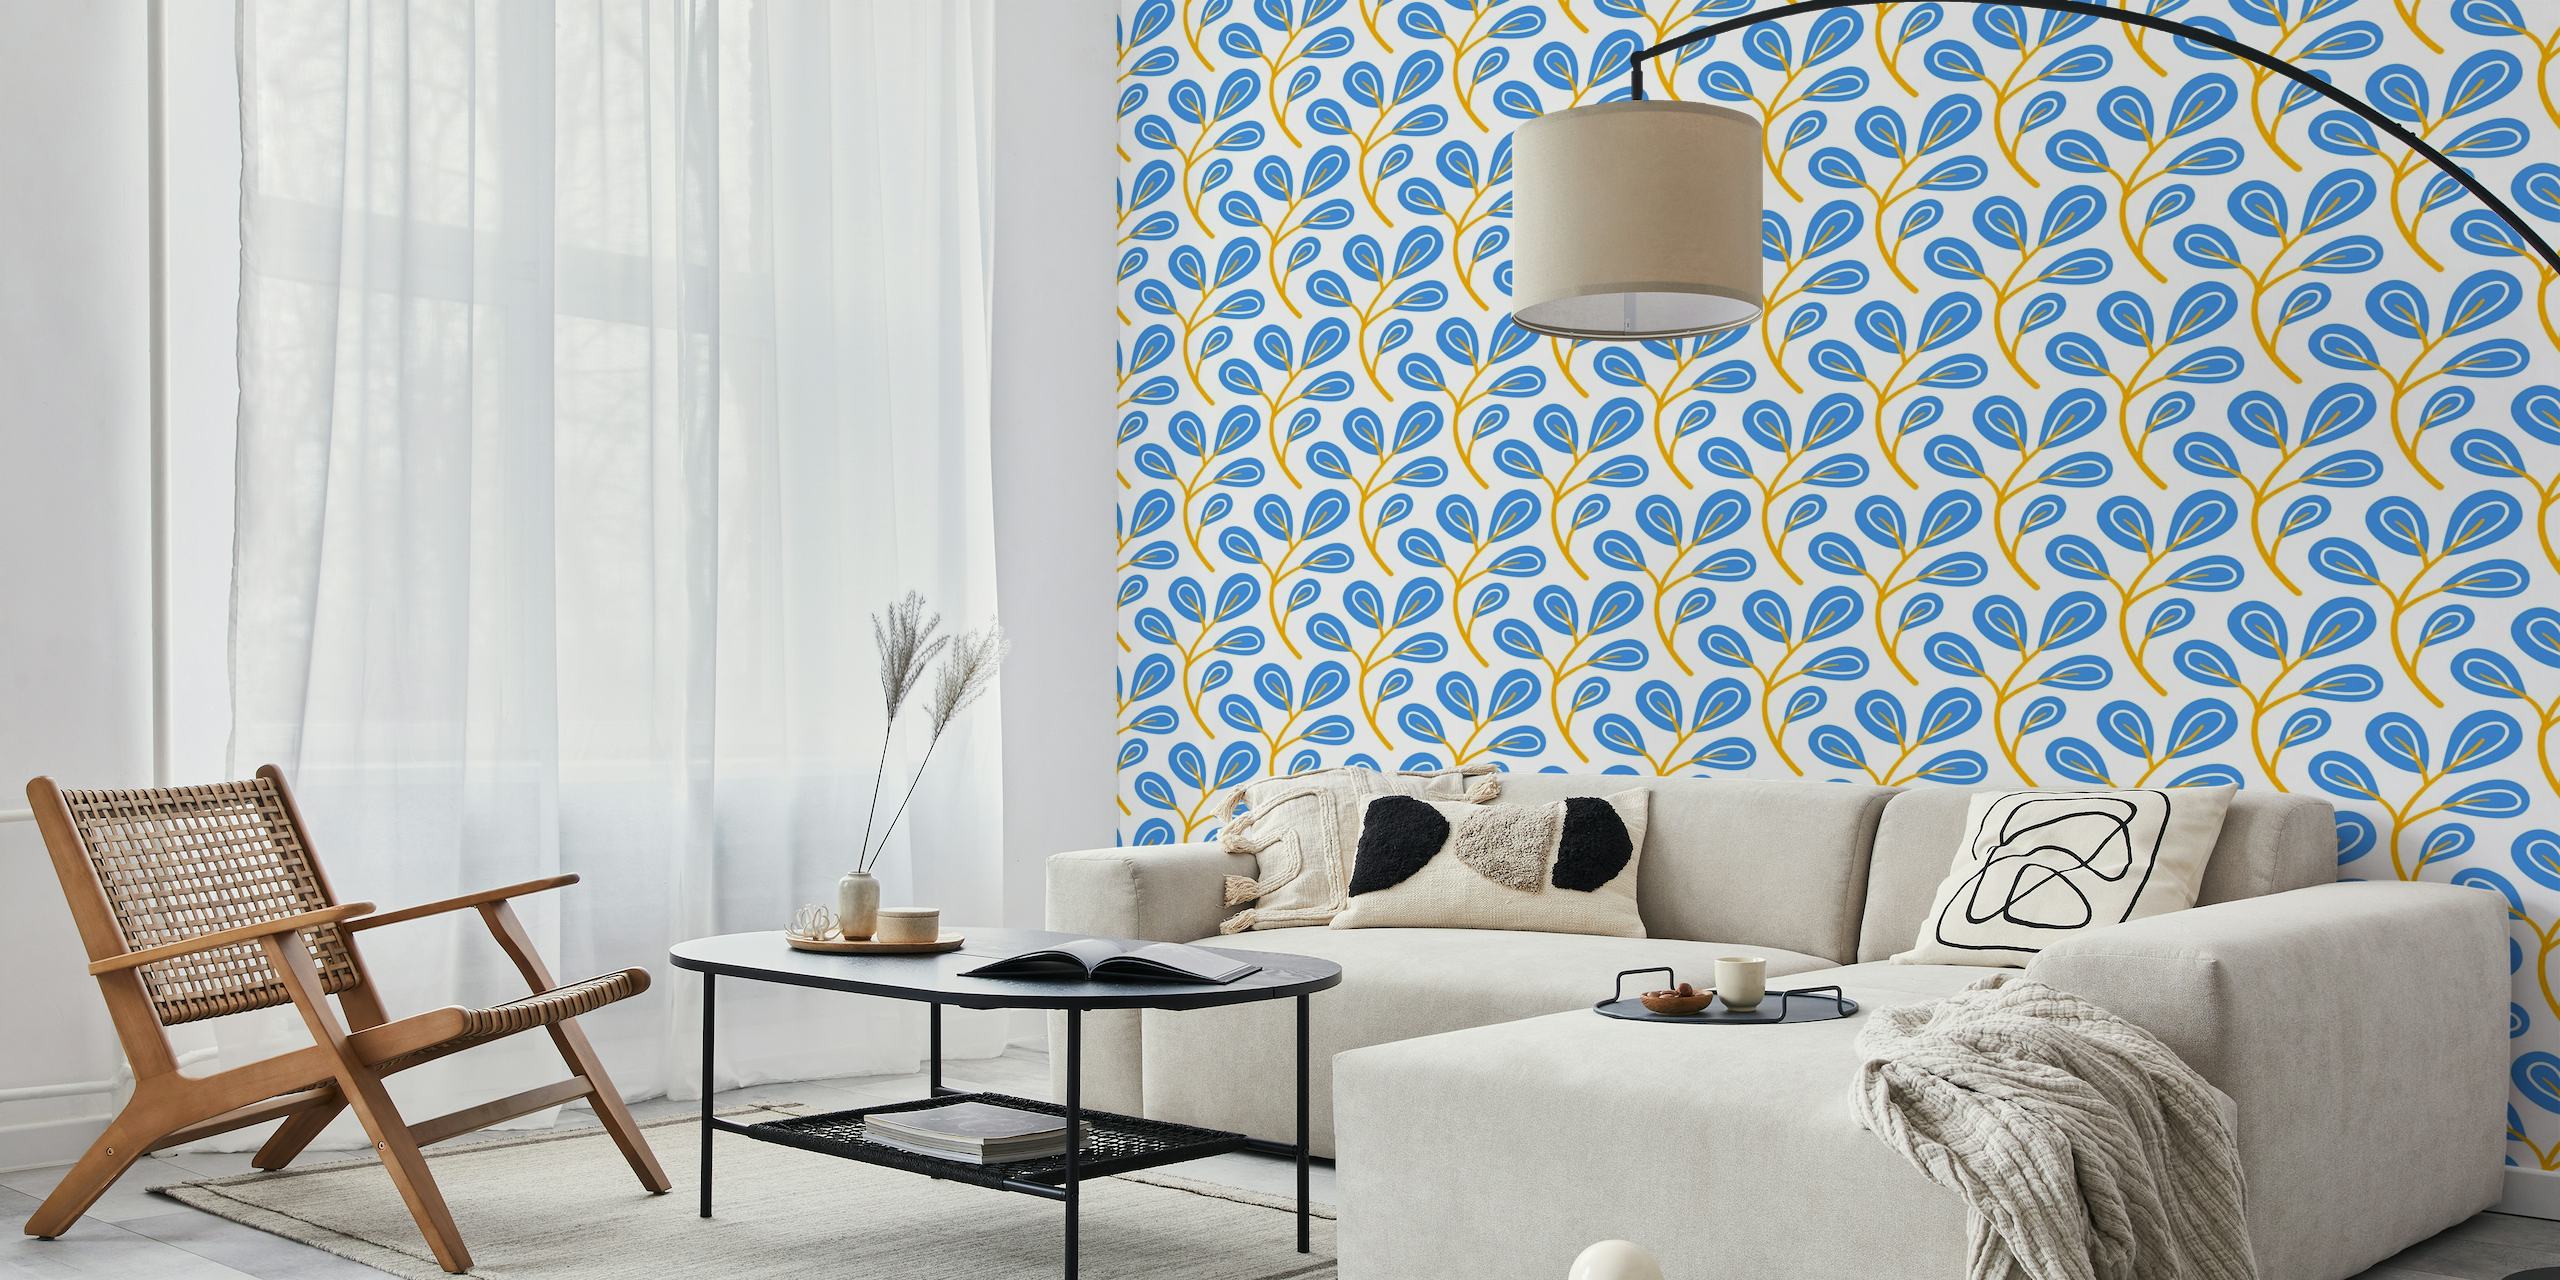 Hand-drawn blue leaves with golden stems on white background wall mural